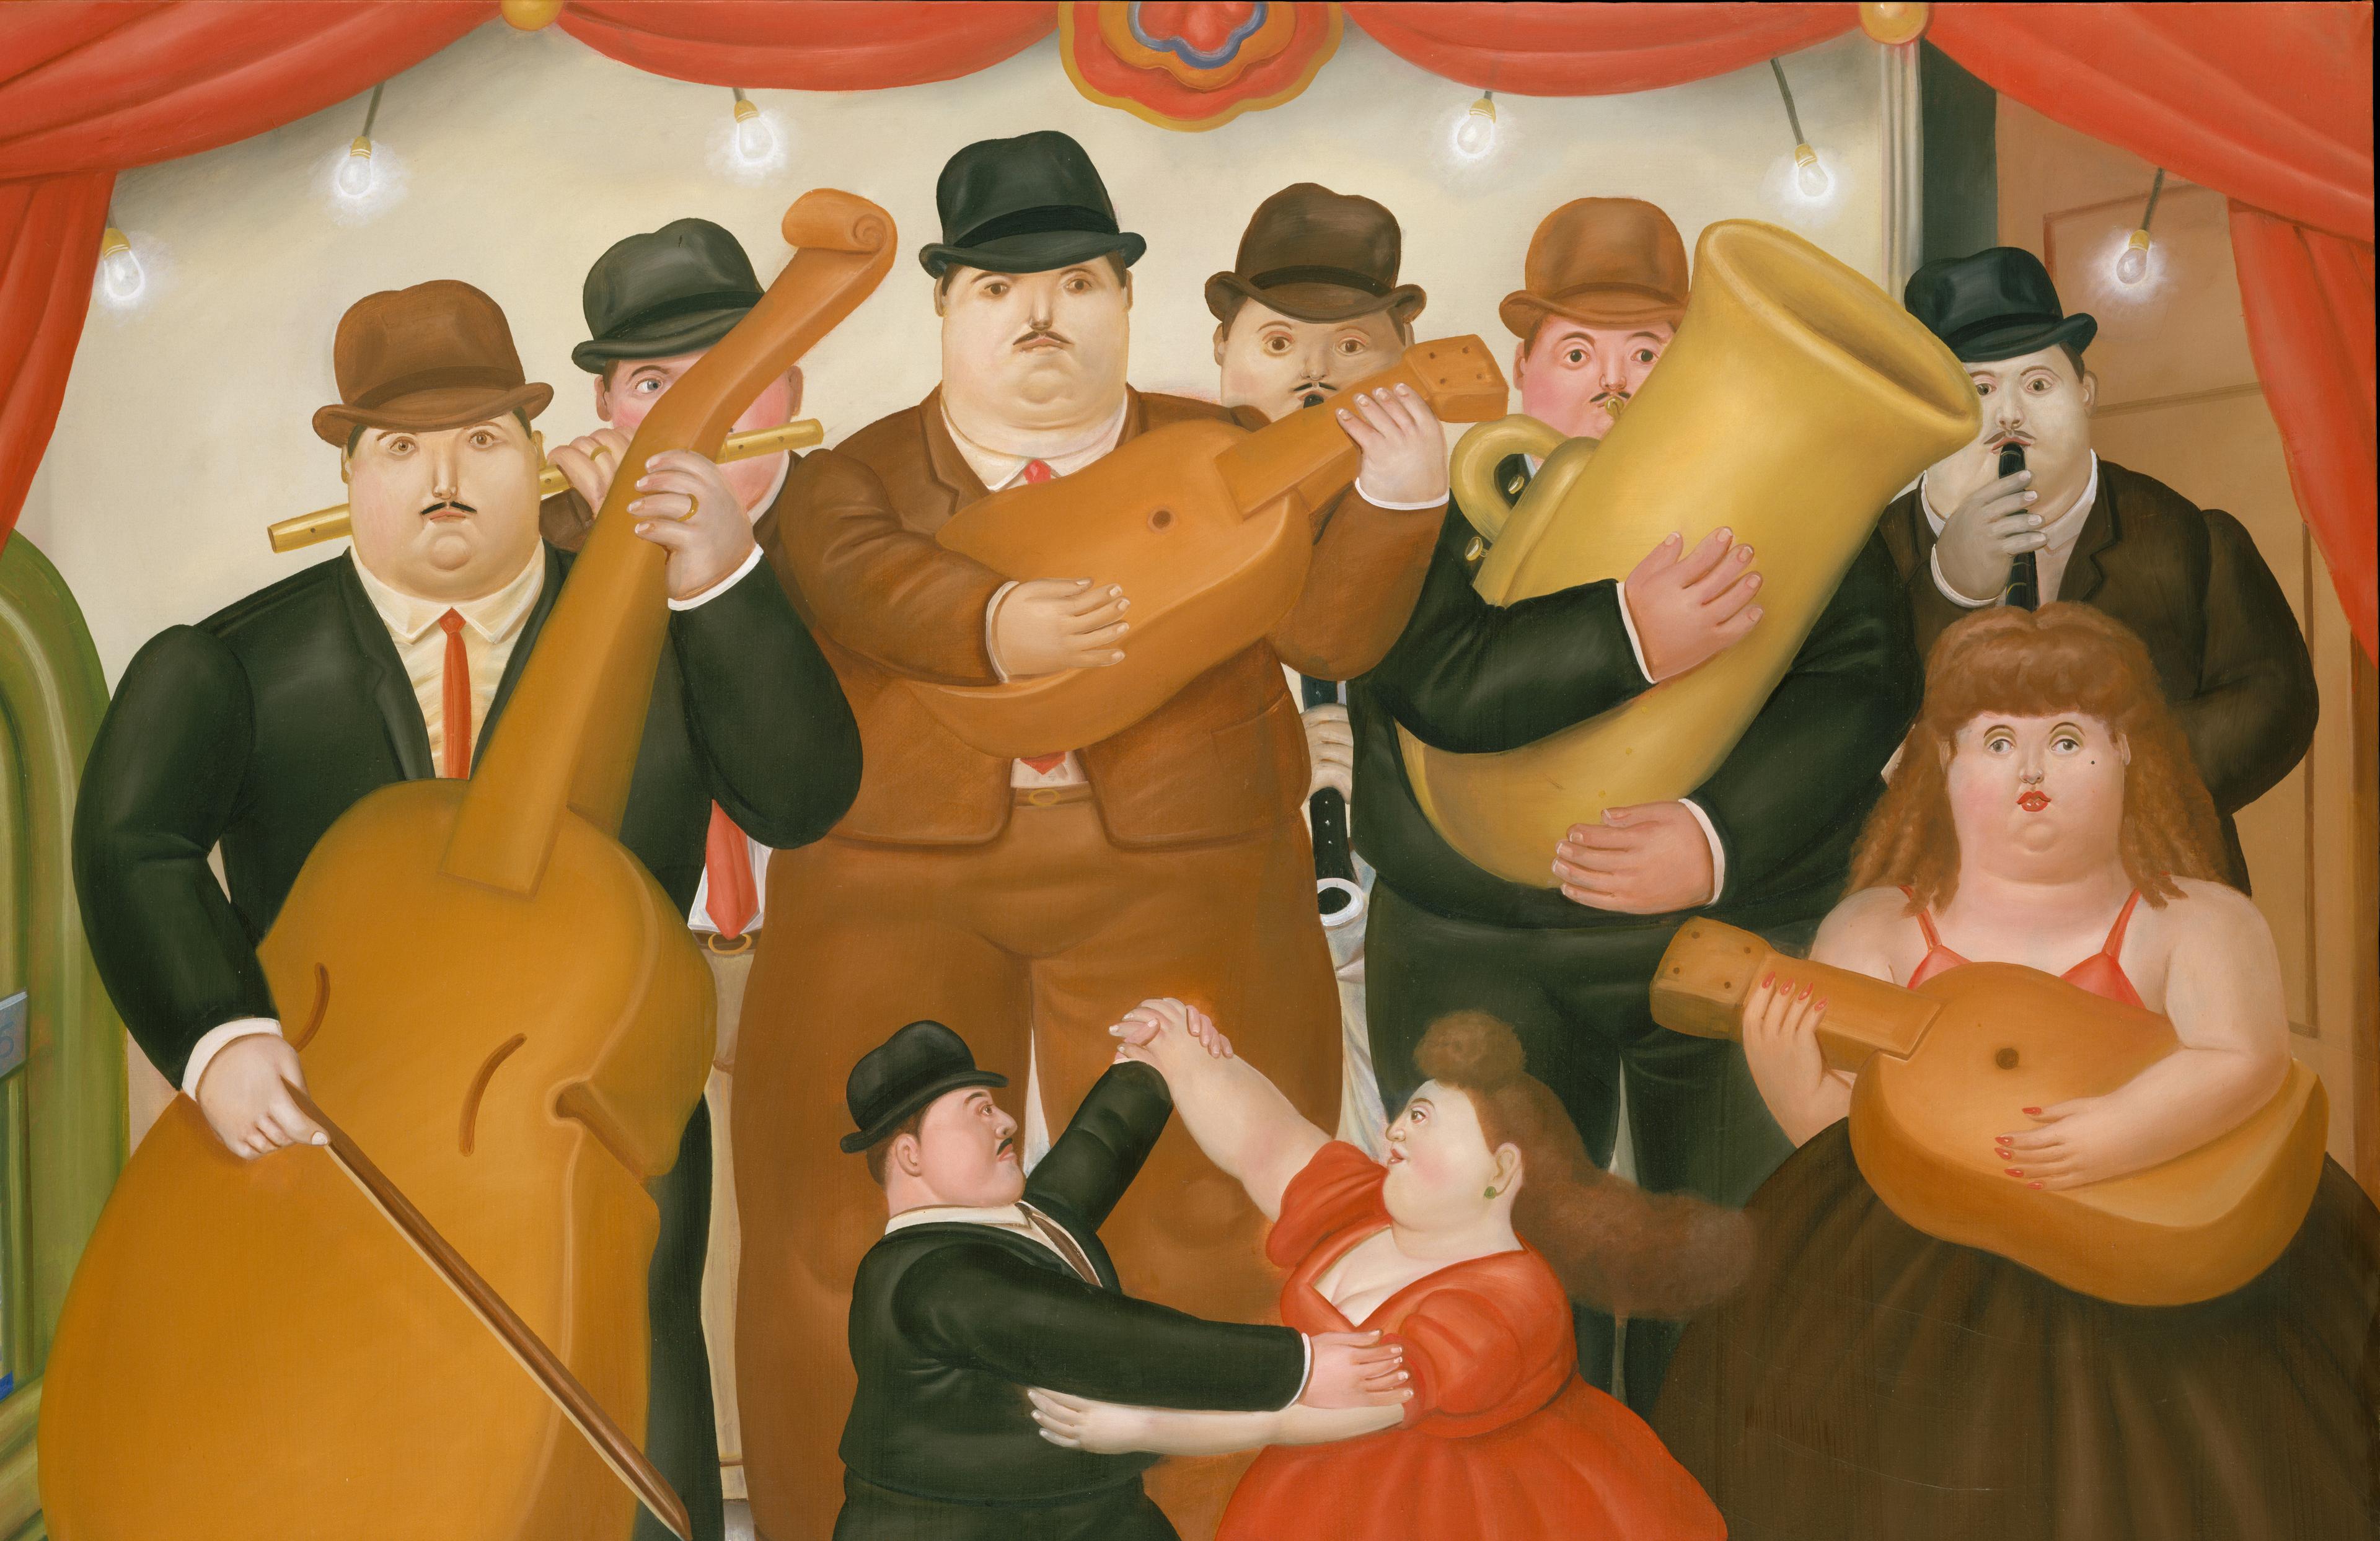 A painting by Botero featuring a group of musicians towering over a small-scale dancing couple